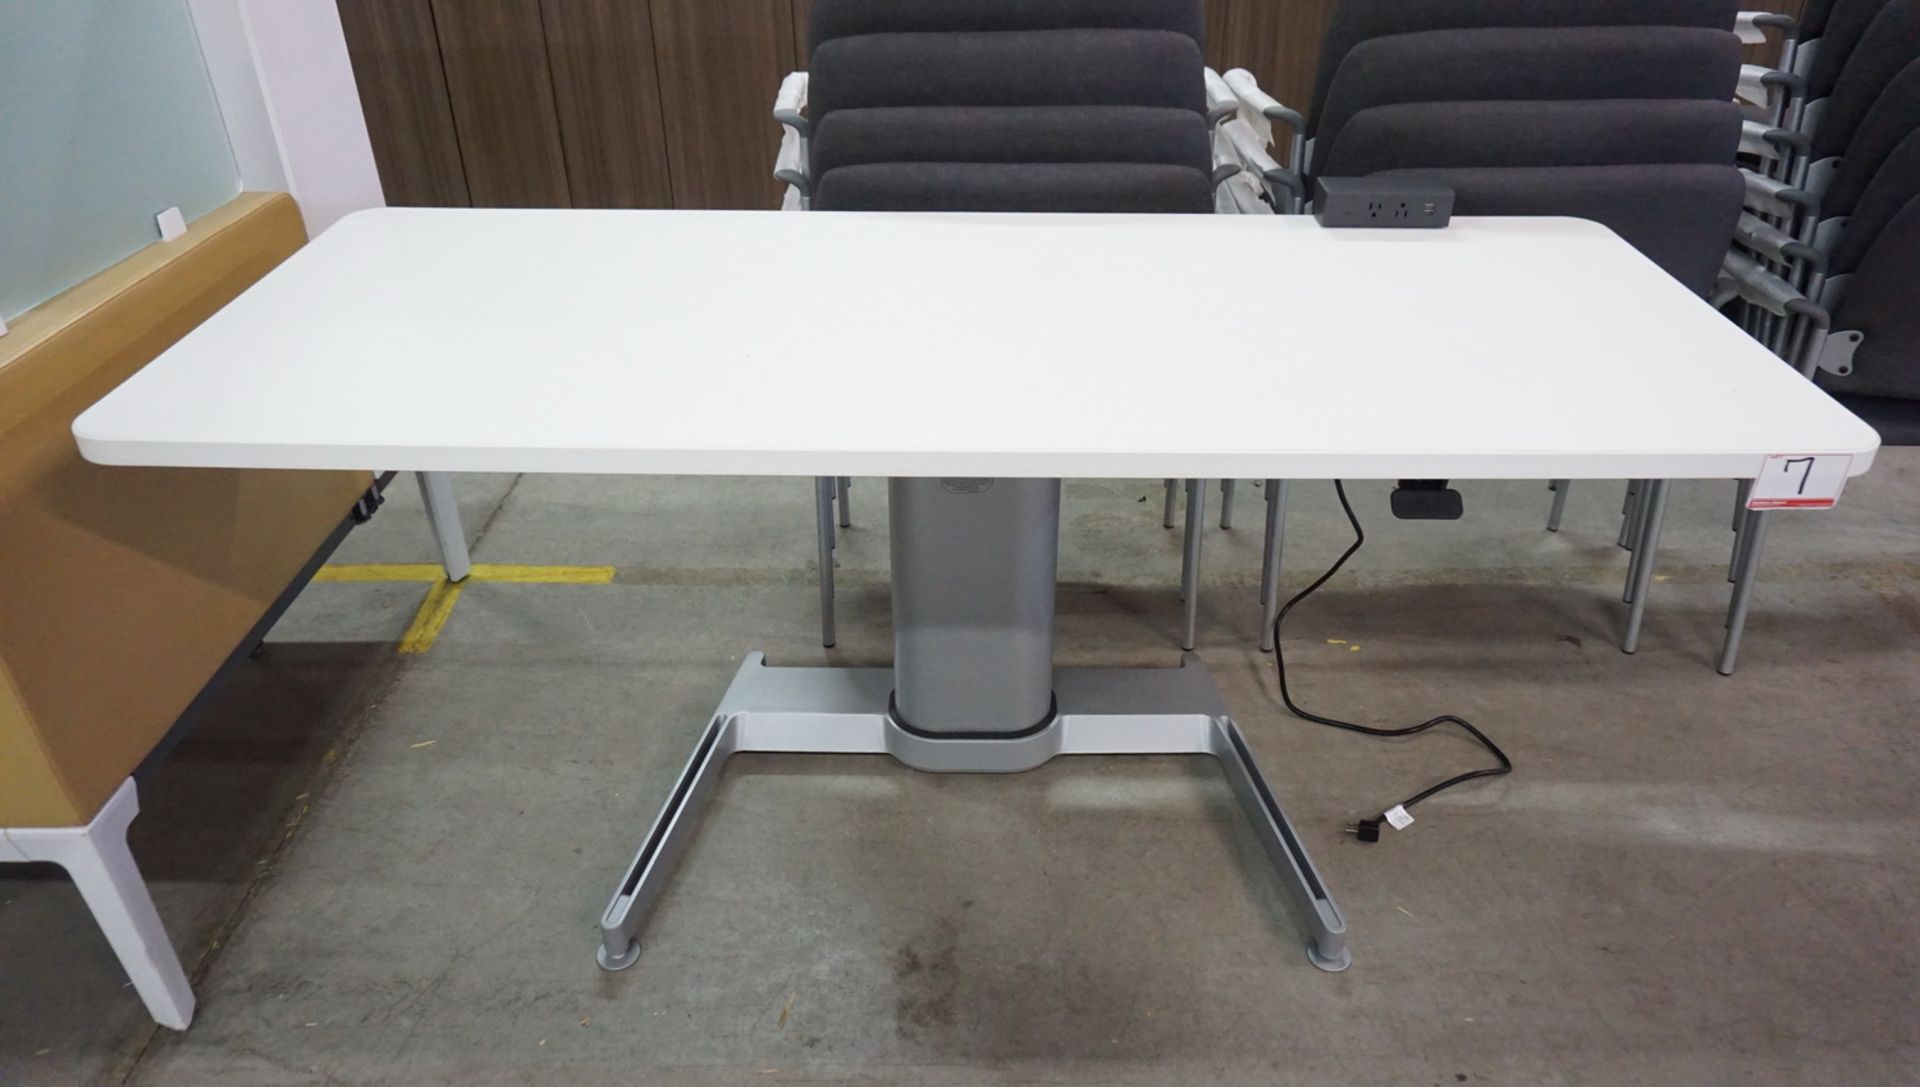 STEELCASE AIRTOUCH HEIGHT ADJUSTABLE DESK 70" X 28" W/ POWER USB OUTLETS